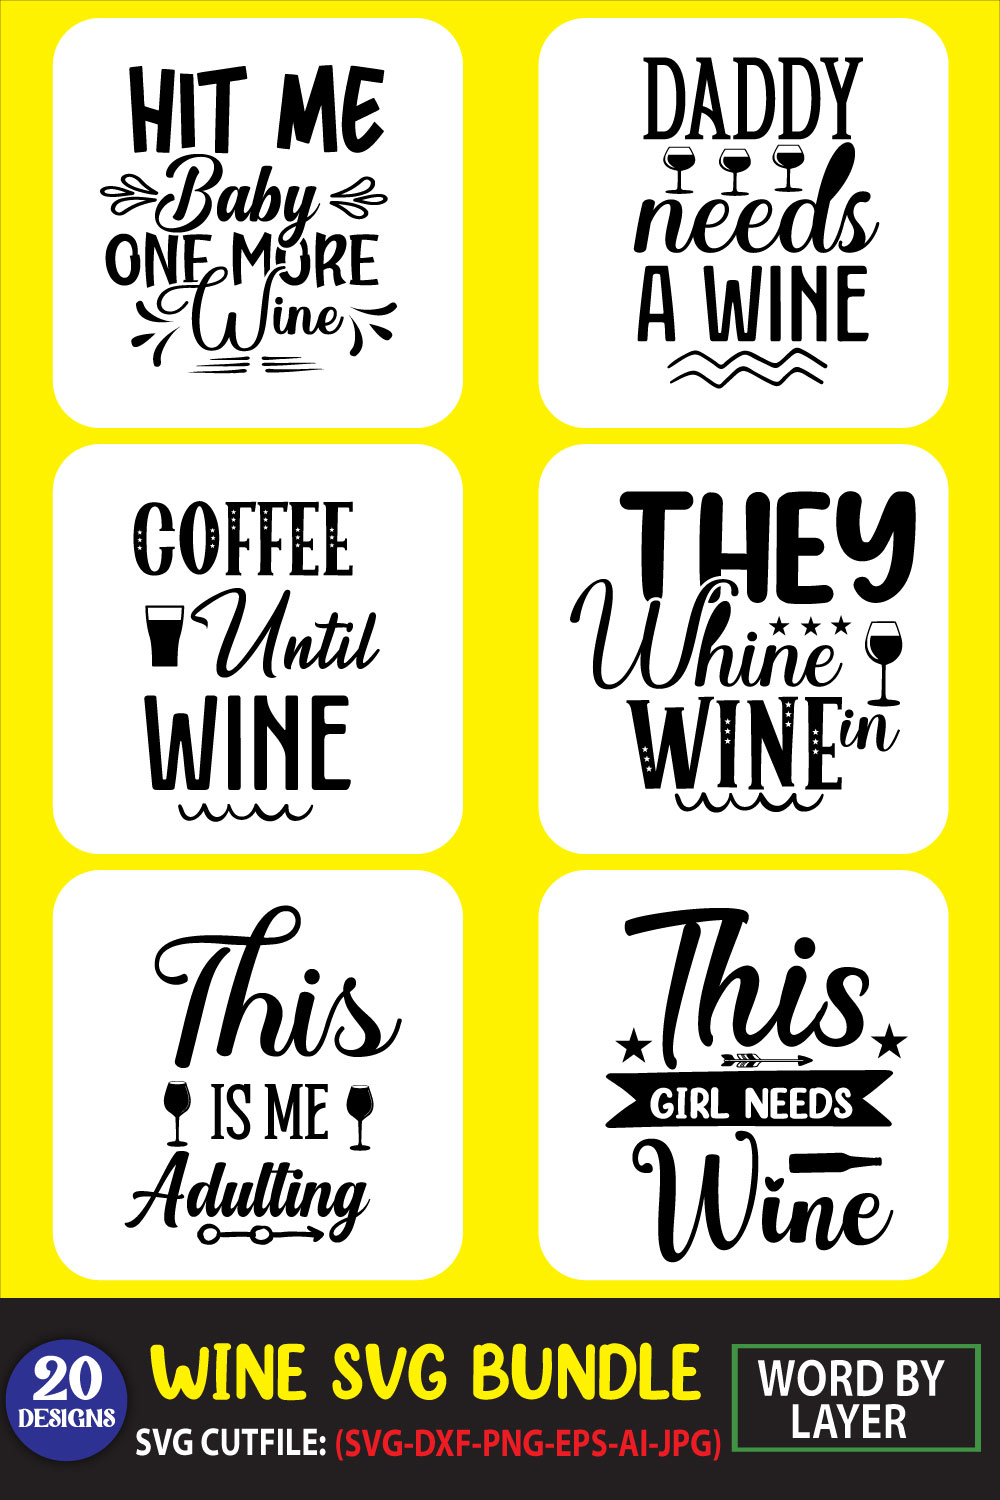 A pack of unique images for prints on the theme of wine